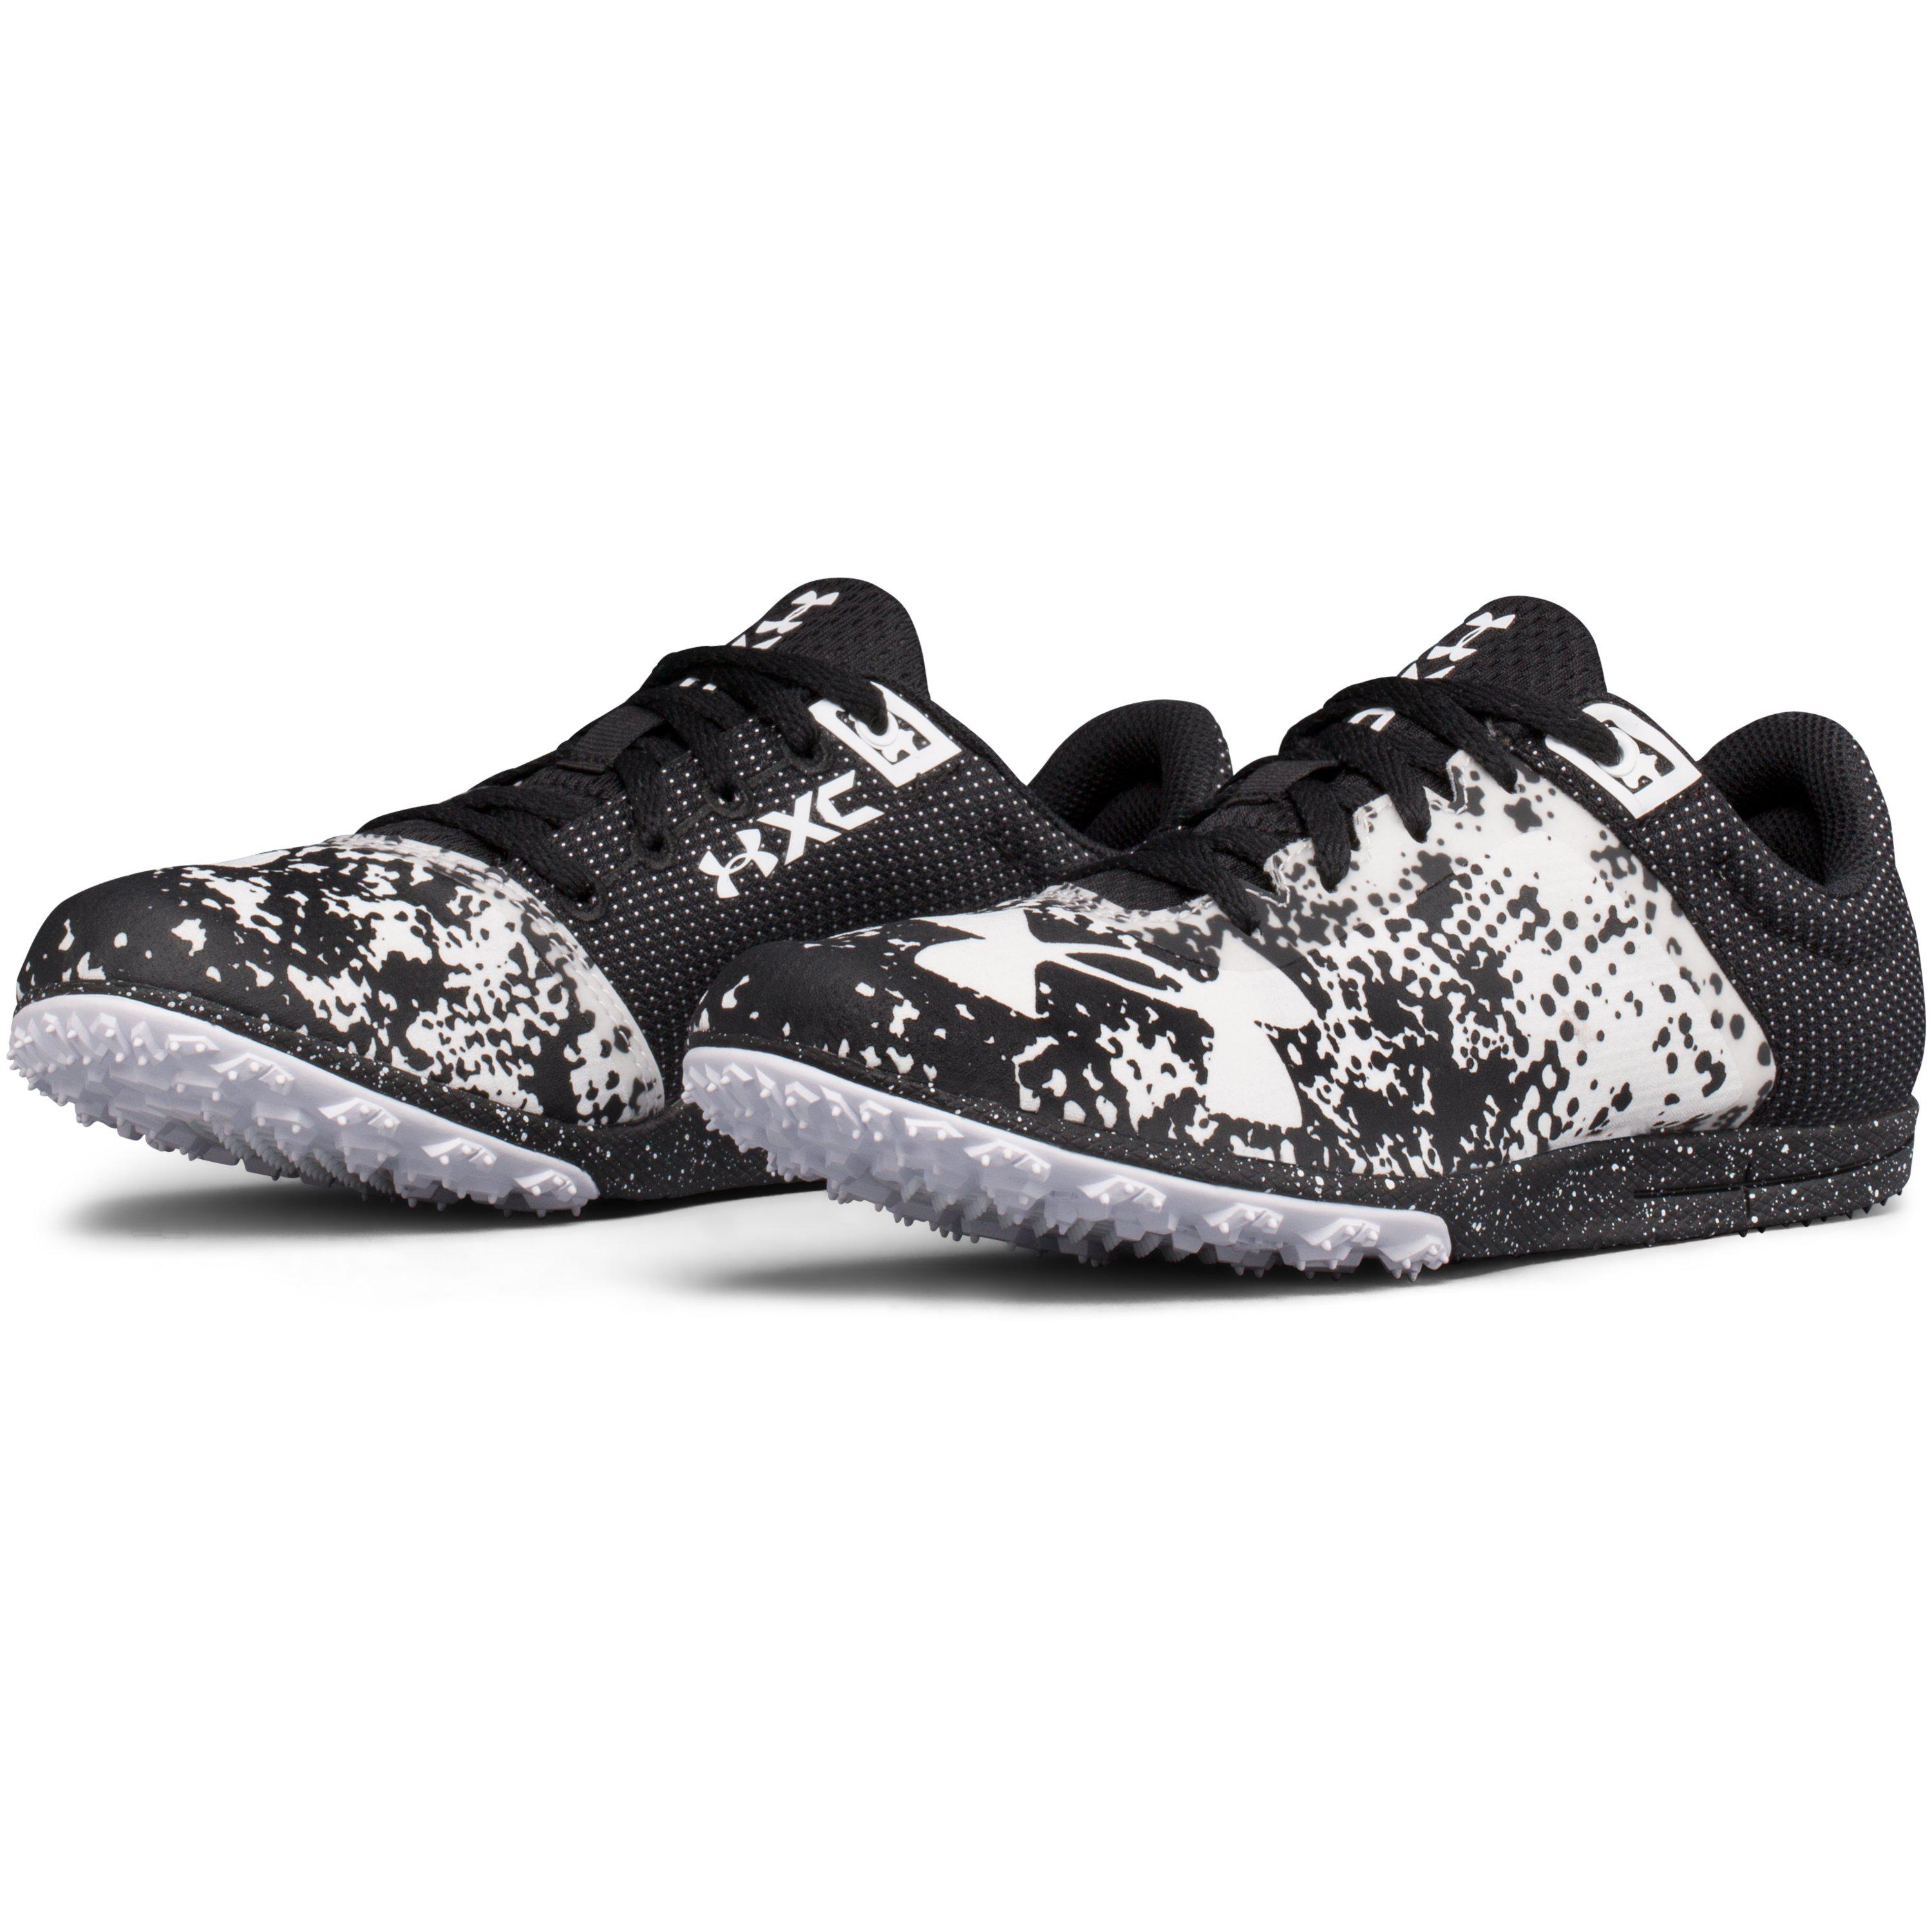 Under Armour Rubber Ua Brigade Xc Spikeless Running Shoes in Black /White  (Black) | Lyst